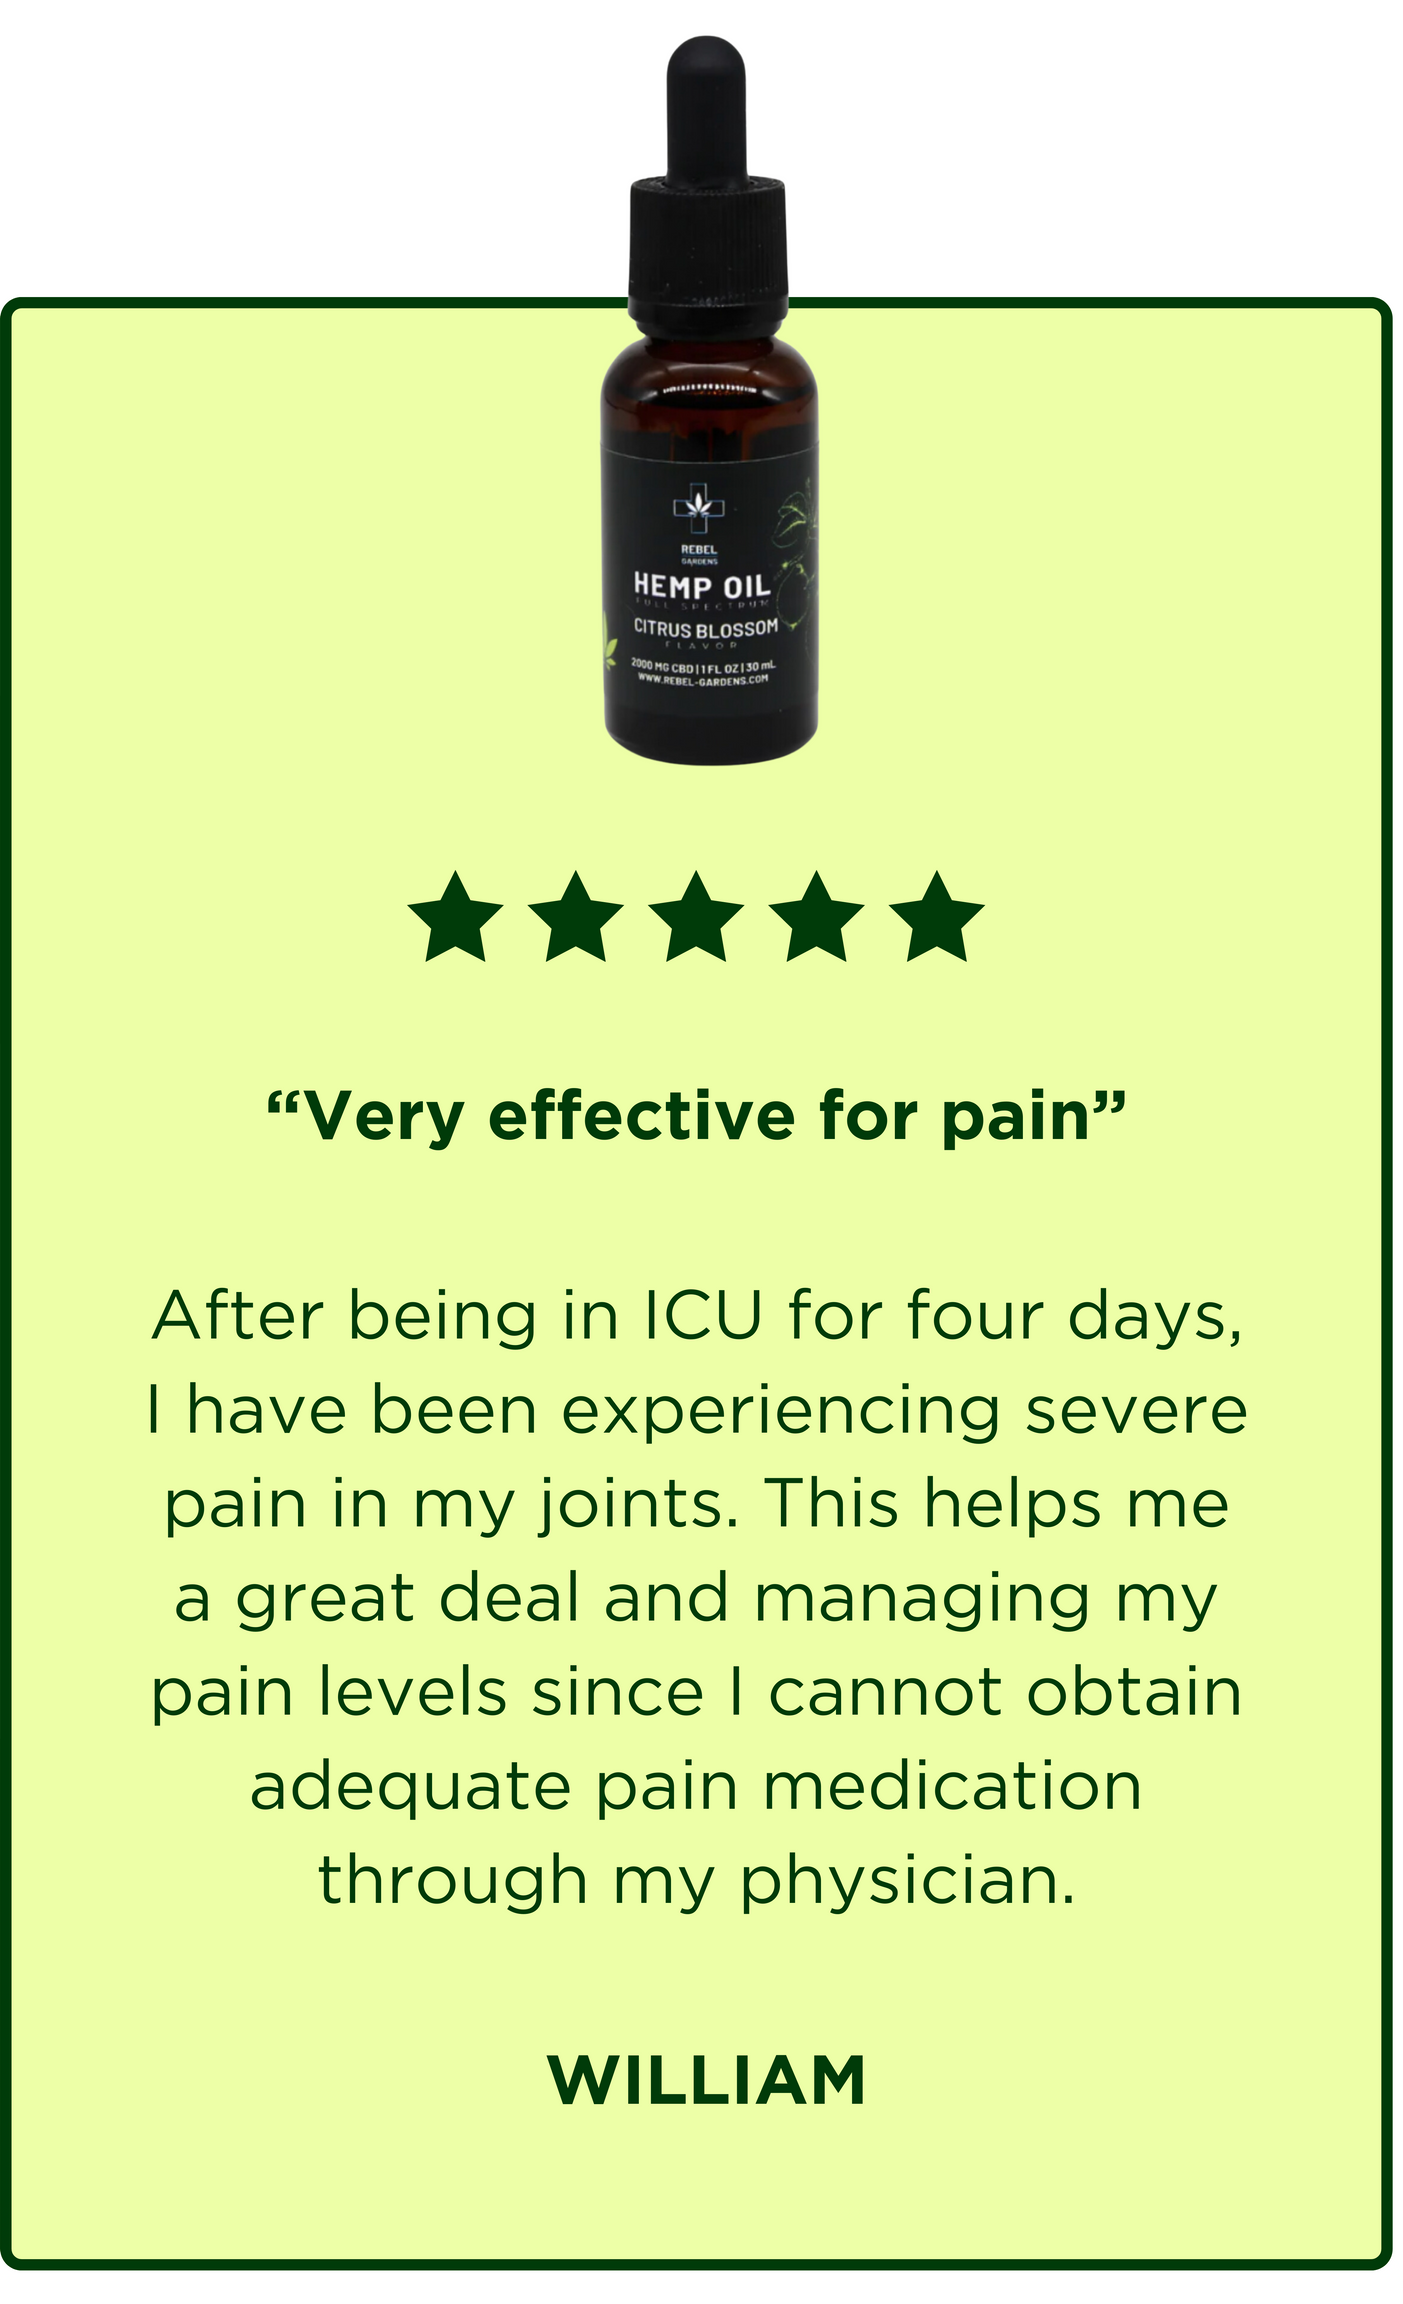 Hemp Oil Testimonial - After being in ICU for four days, I have been experiencing severe pain in my joints. This helps me a great deal and managing my pain levels since I cannot obtain adequate pain medication through my physician.